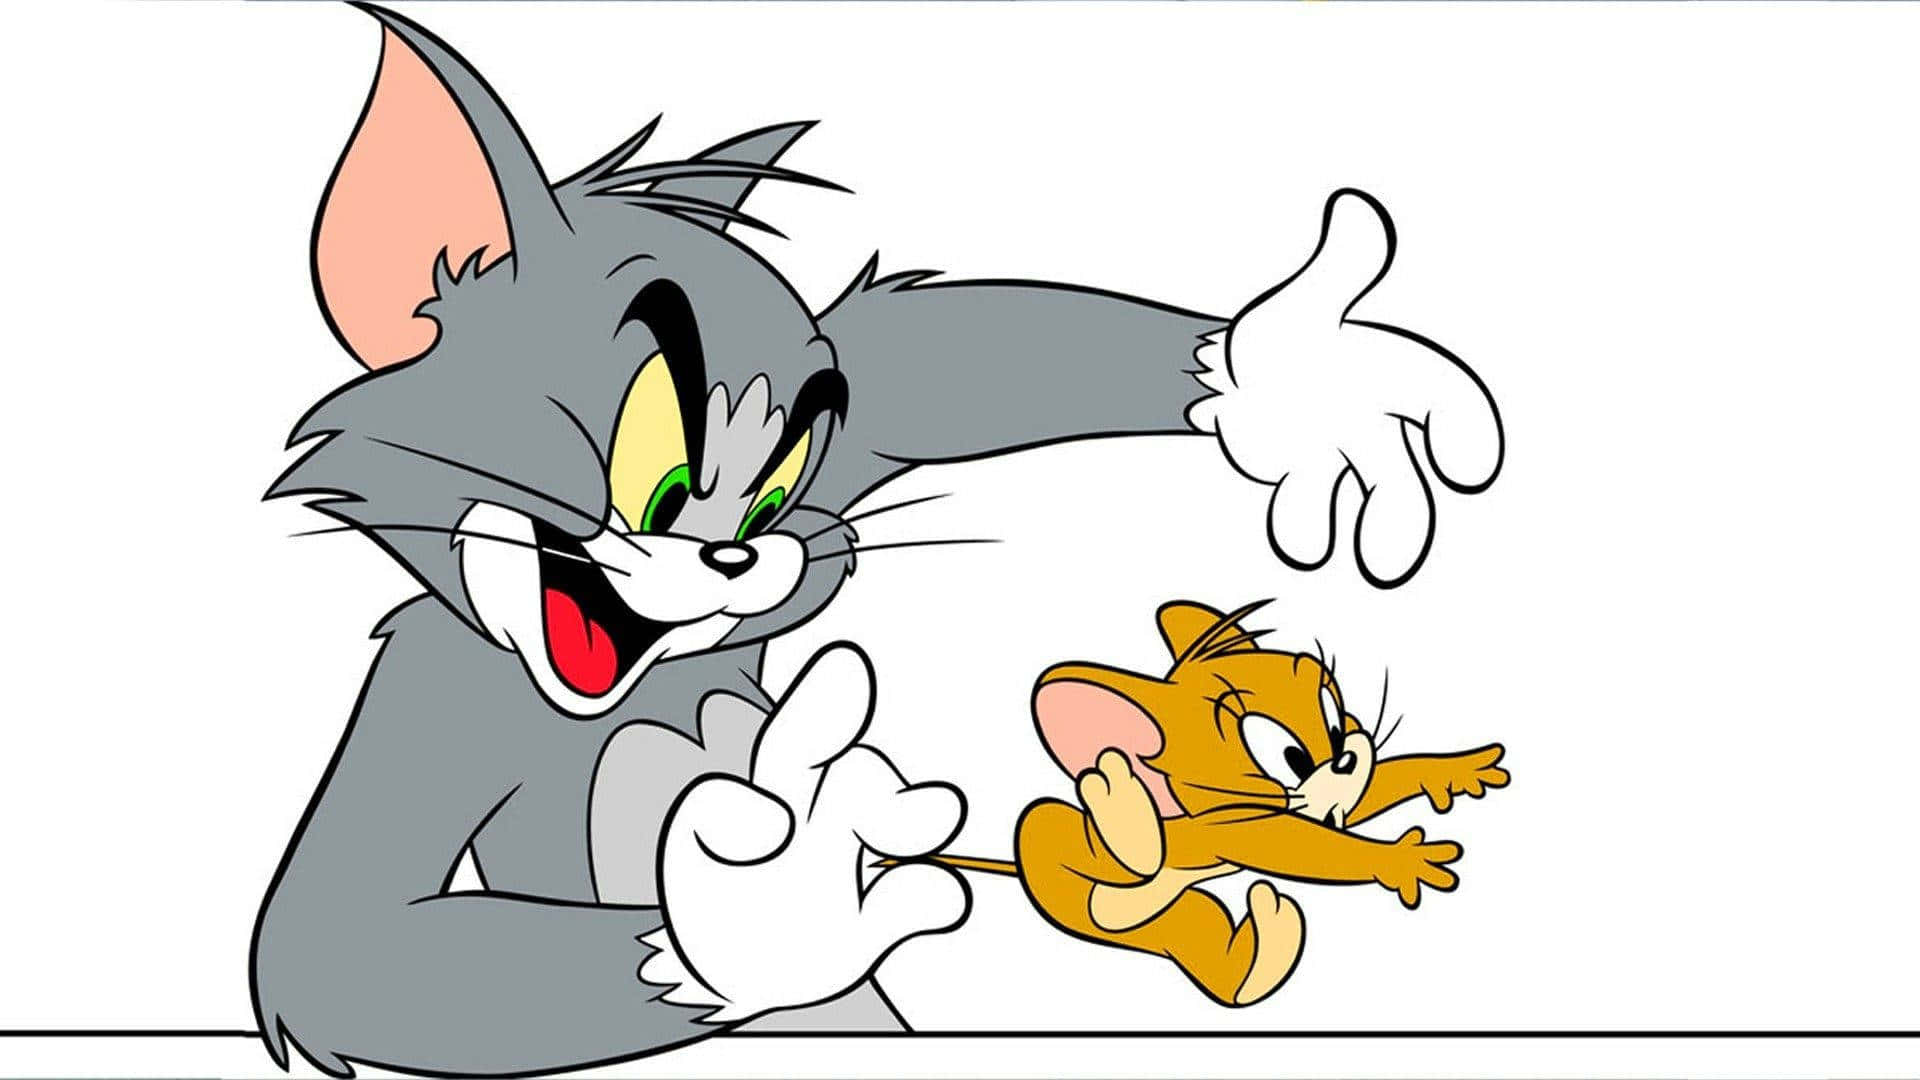 Tom and Jerry sharing a laugh Wallpaper